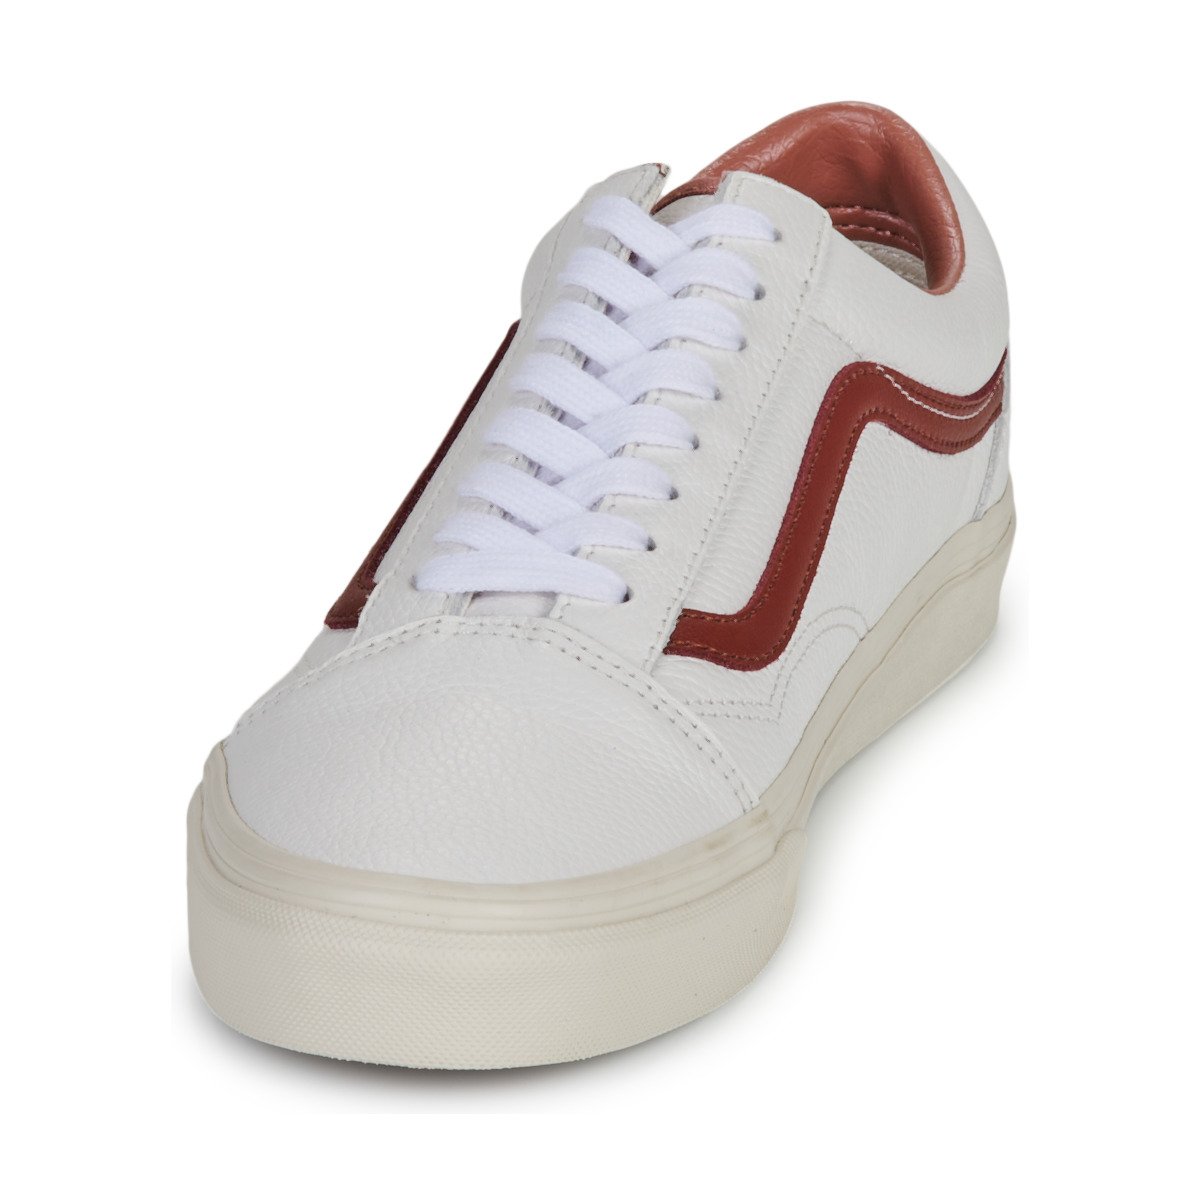 Shoes  Old Skool PREMIUM LEATHER RUSSET BROWN